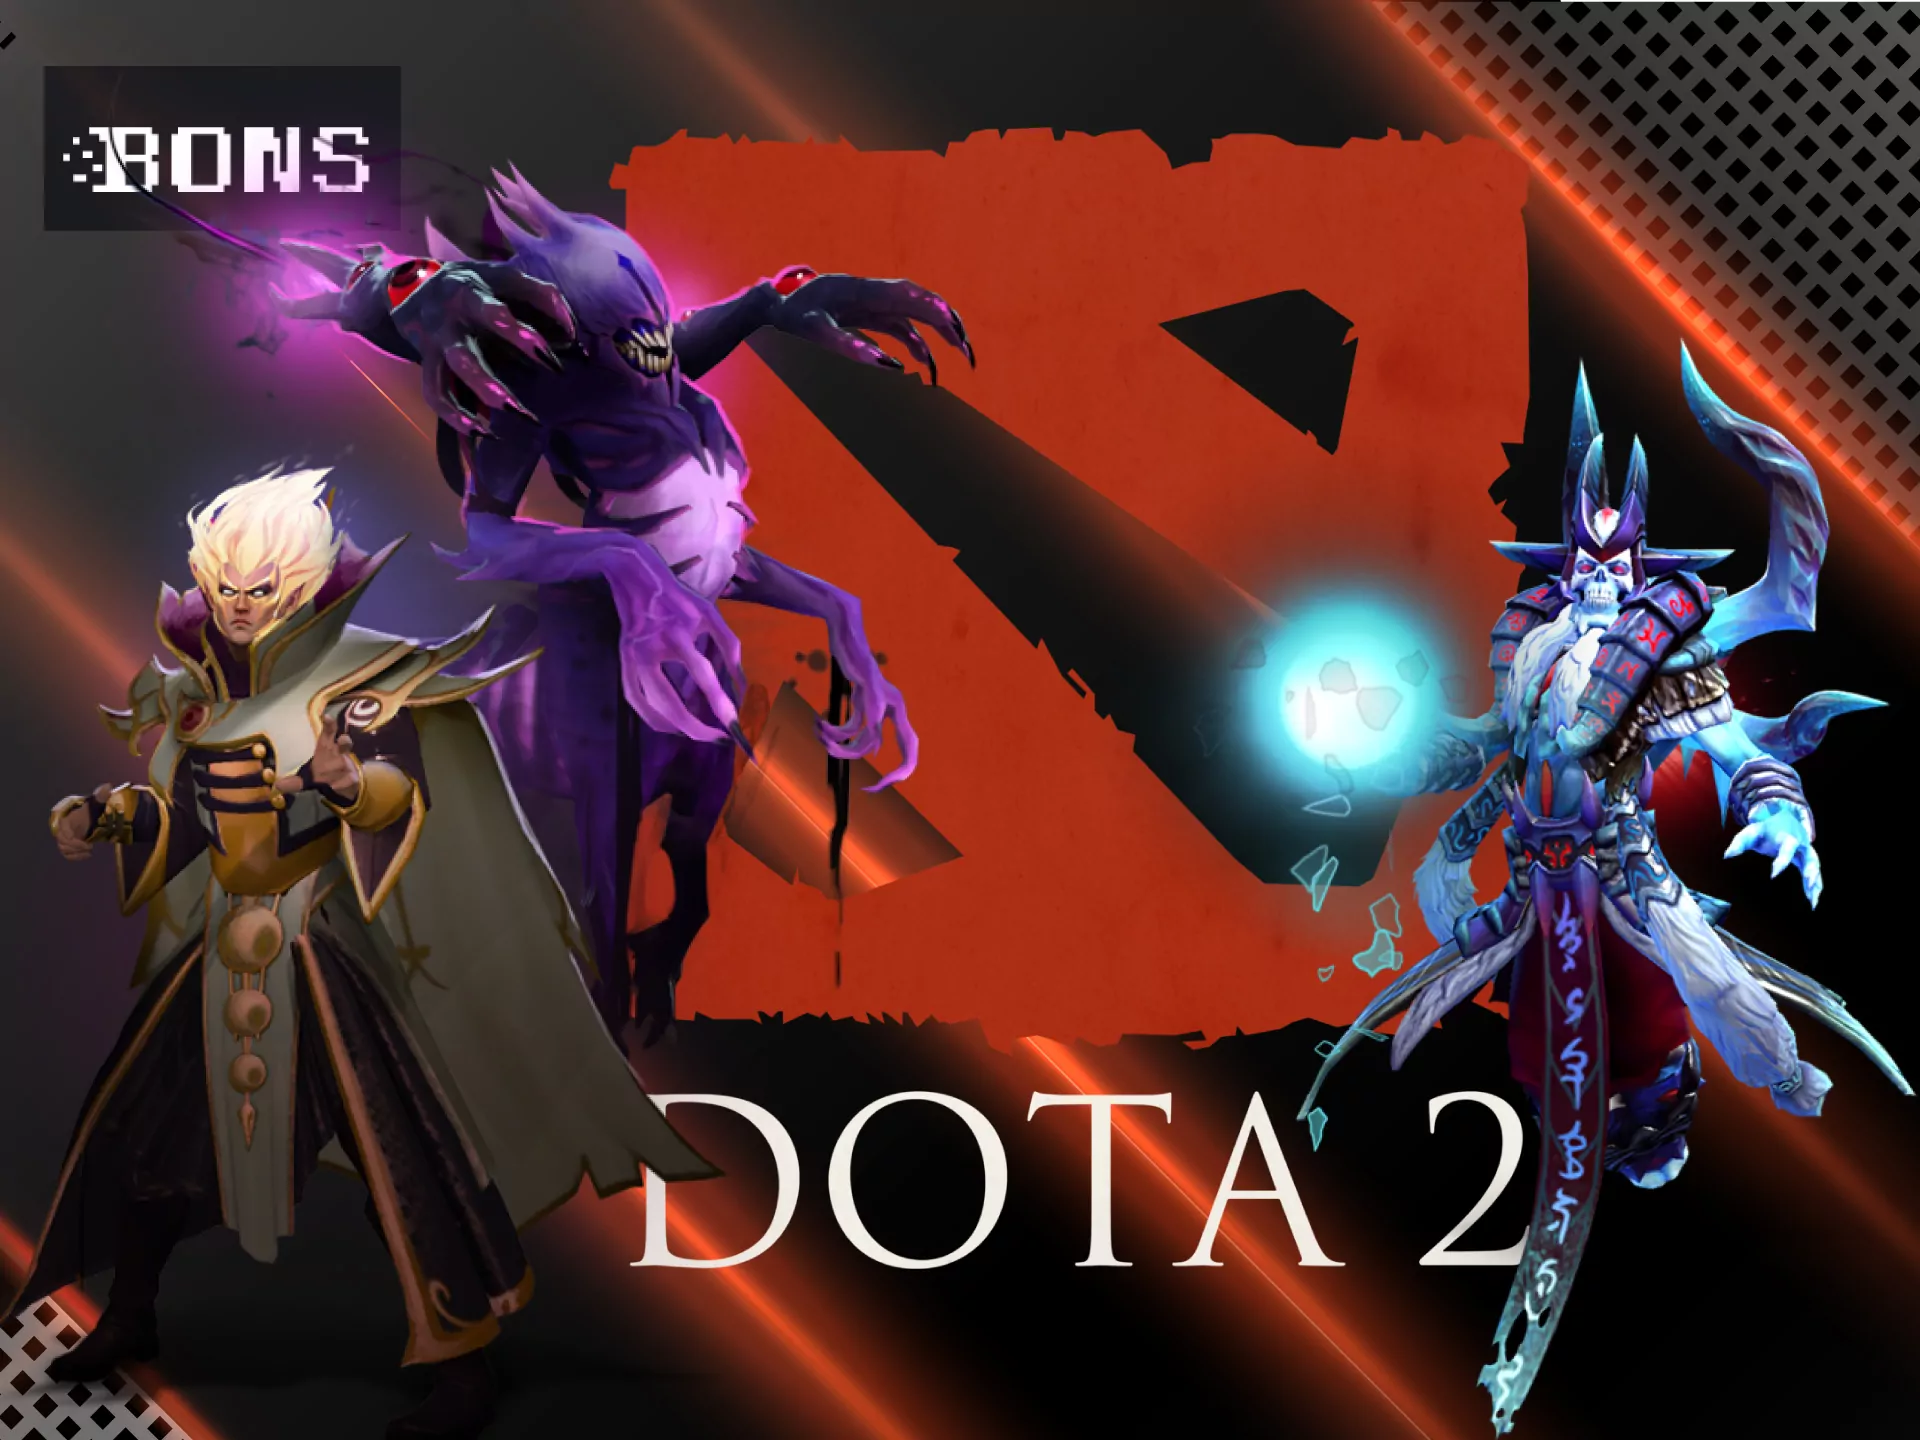 Bons offers the Dota 2 events for betting.